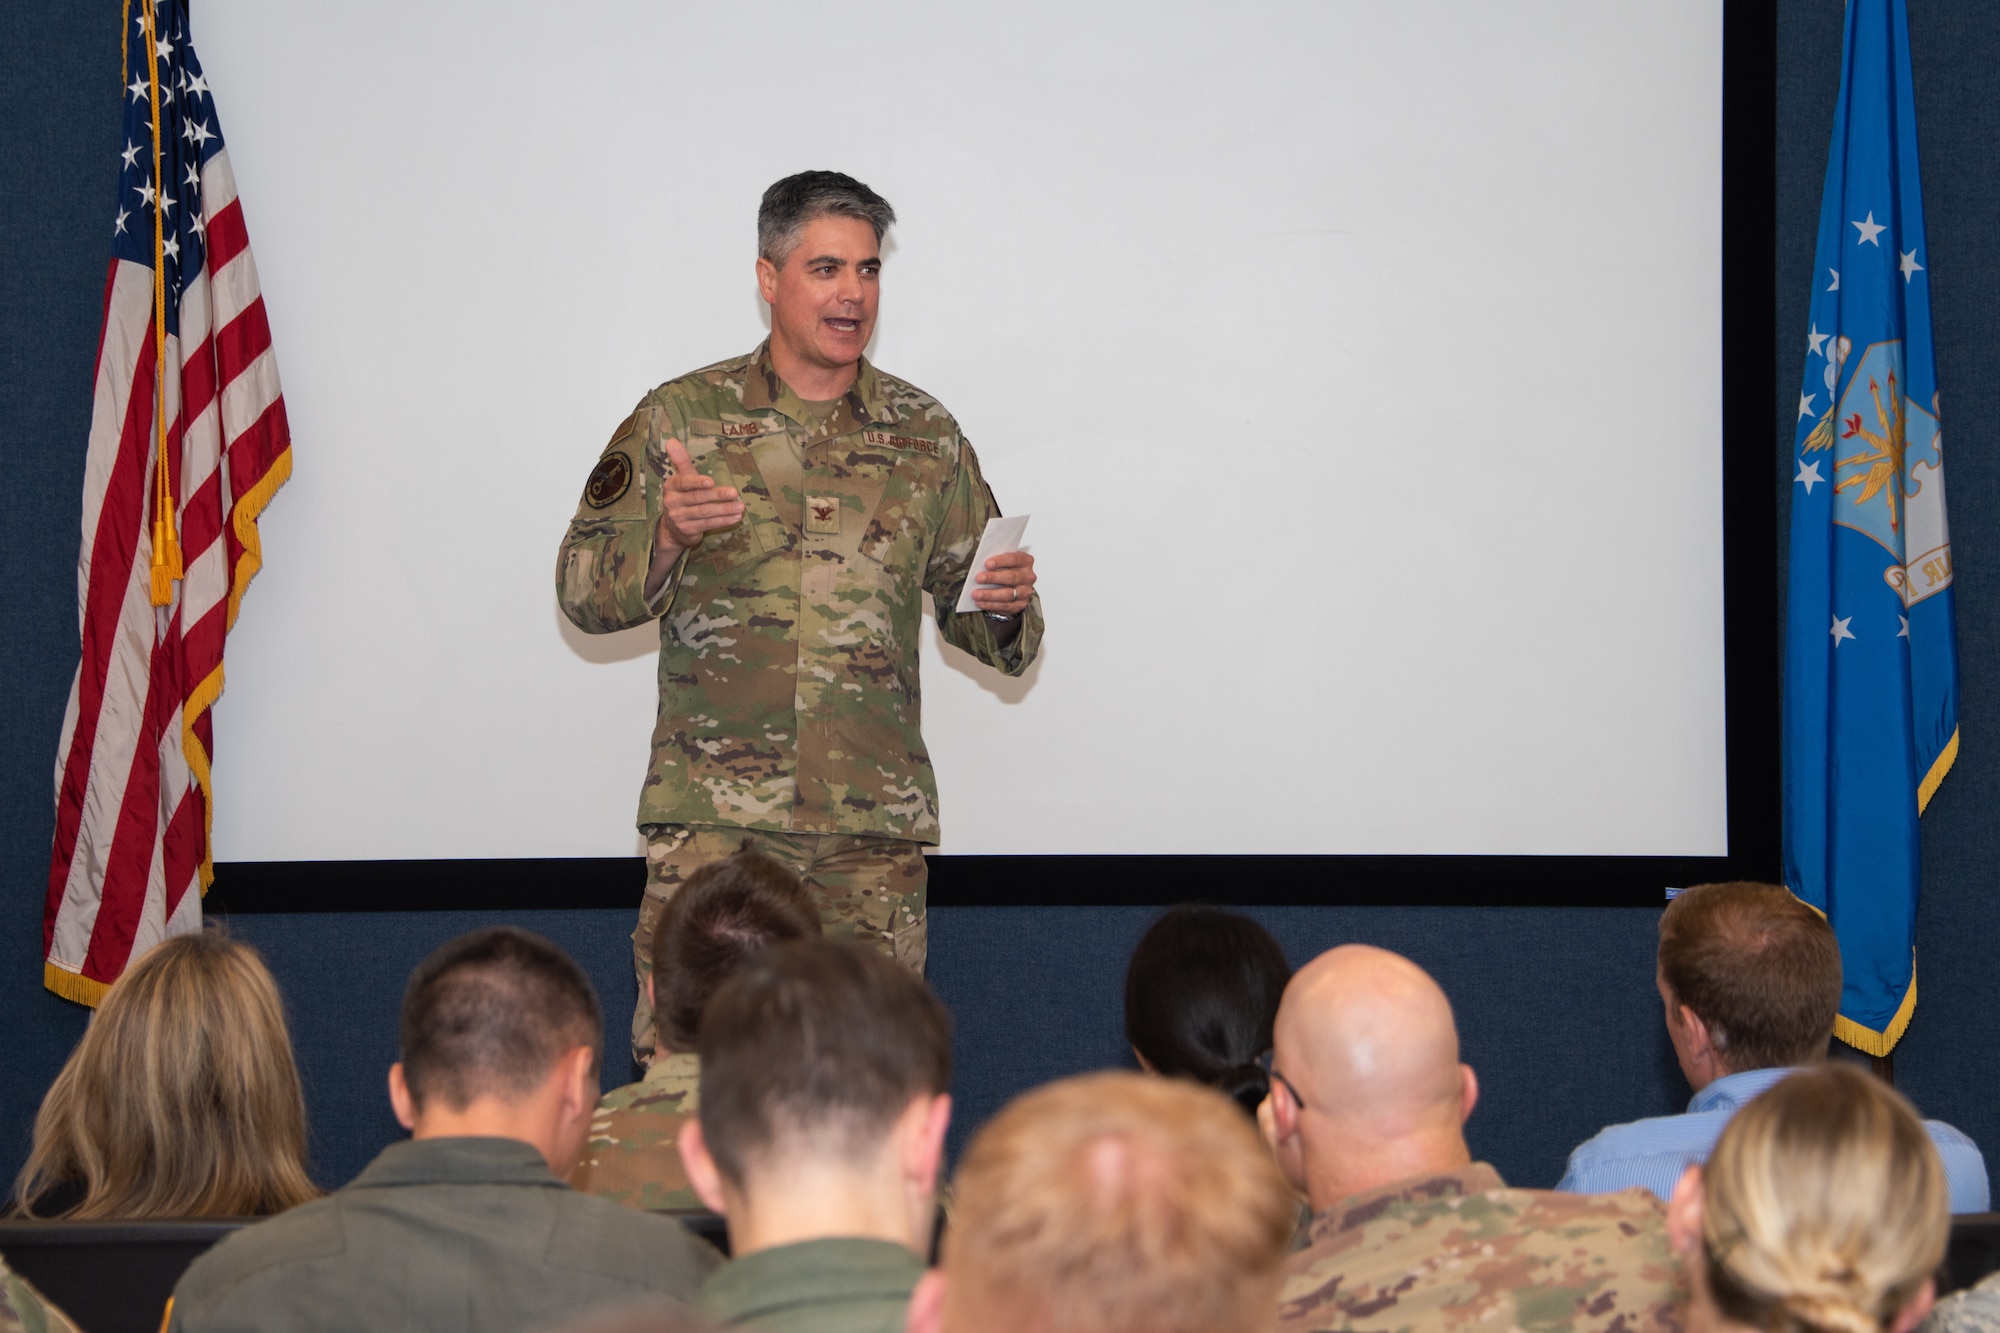 Col. Jason Lamb, Air Education and Training Command Director of Intelligence, Analysis, and Innovation, speaks with the latest graduates of Air University’s Leadership Development Course for Squadron Command, Aug. 29, 2019, on Maxwell Air Force Base, Alabama. This eight day course, developed in response to the Chief of Staff of the Air Force, Gen. David Goldfein, priority of revitalizing the squadron aims to develop officers and civilians approaching positions of command.